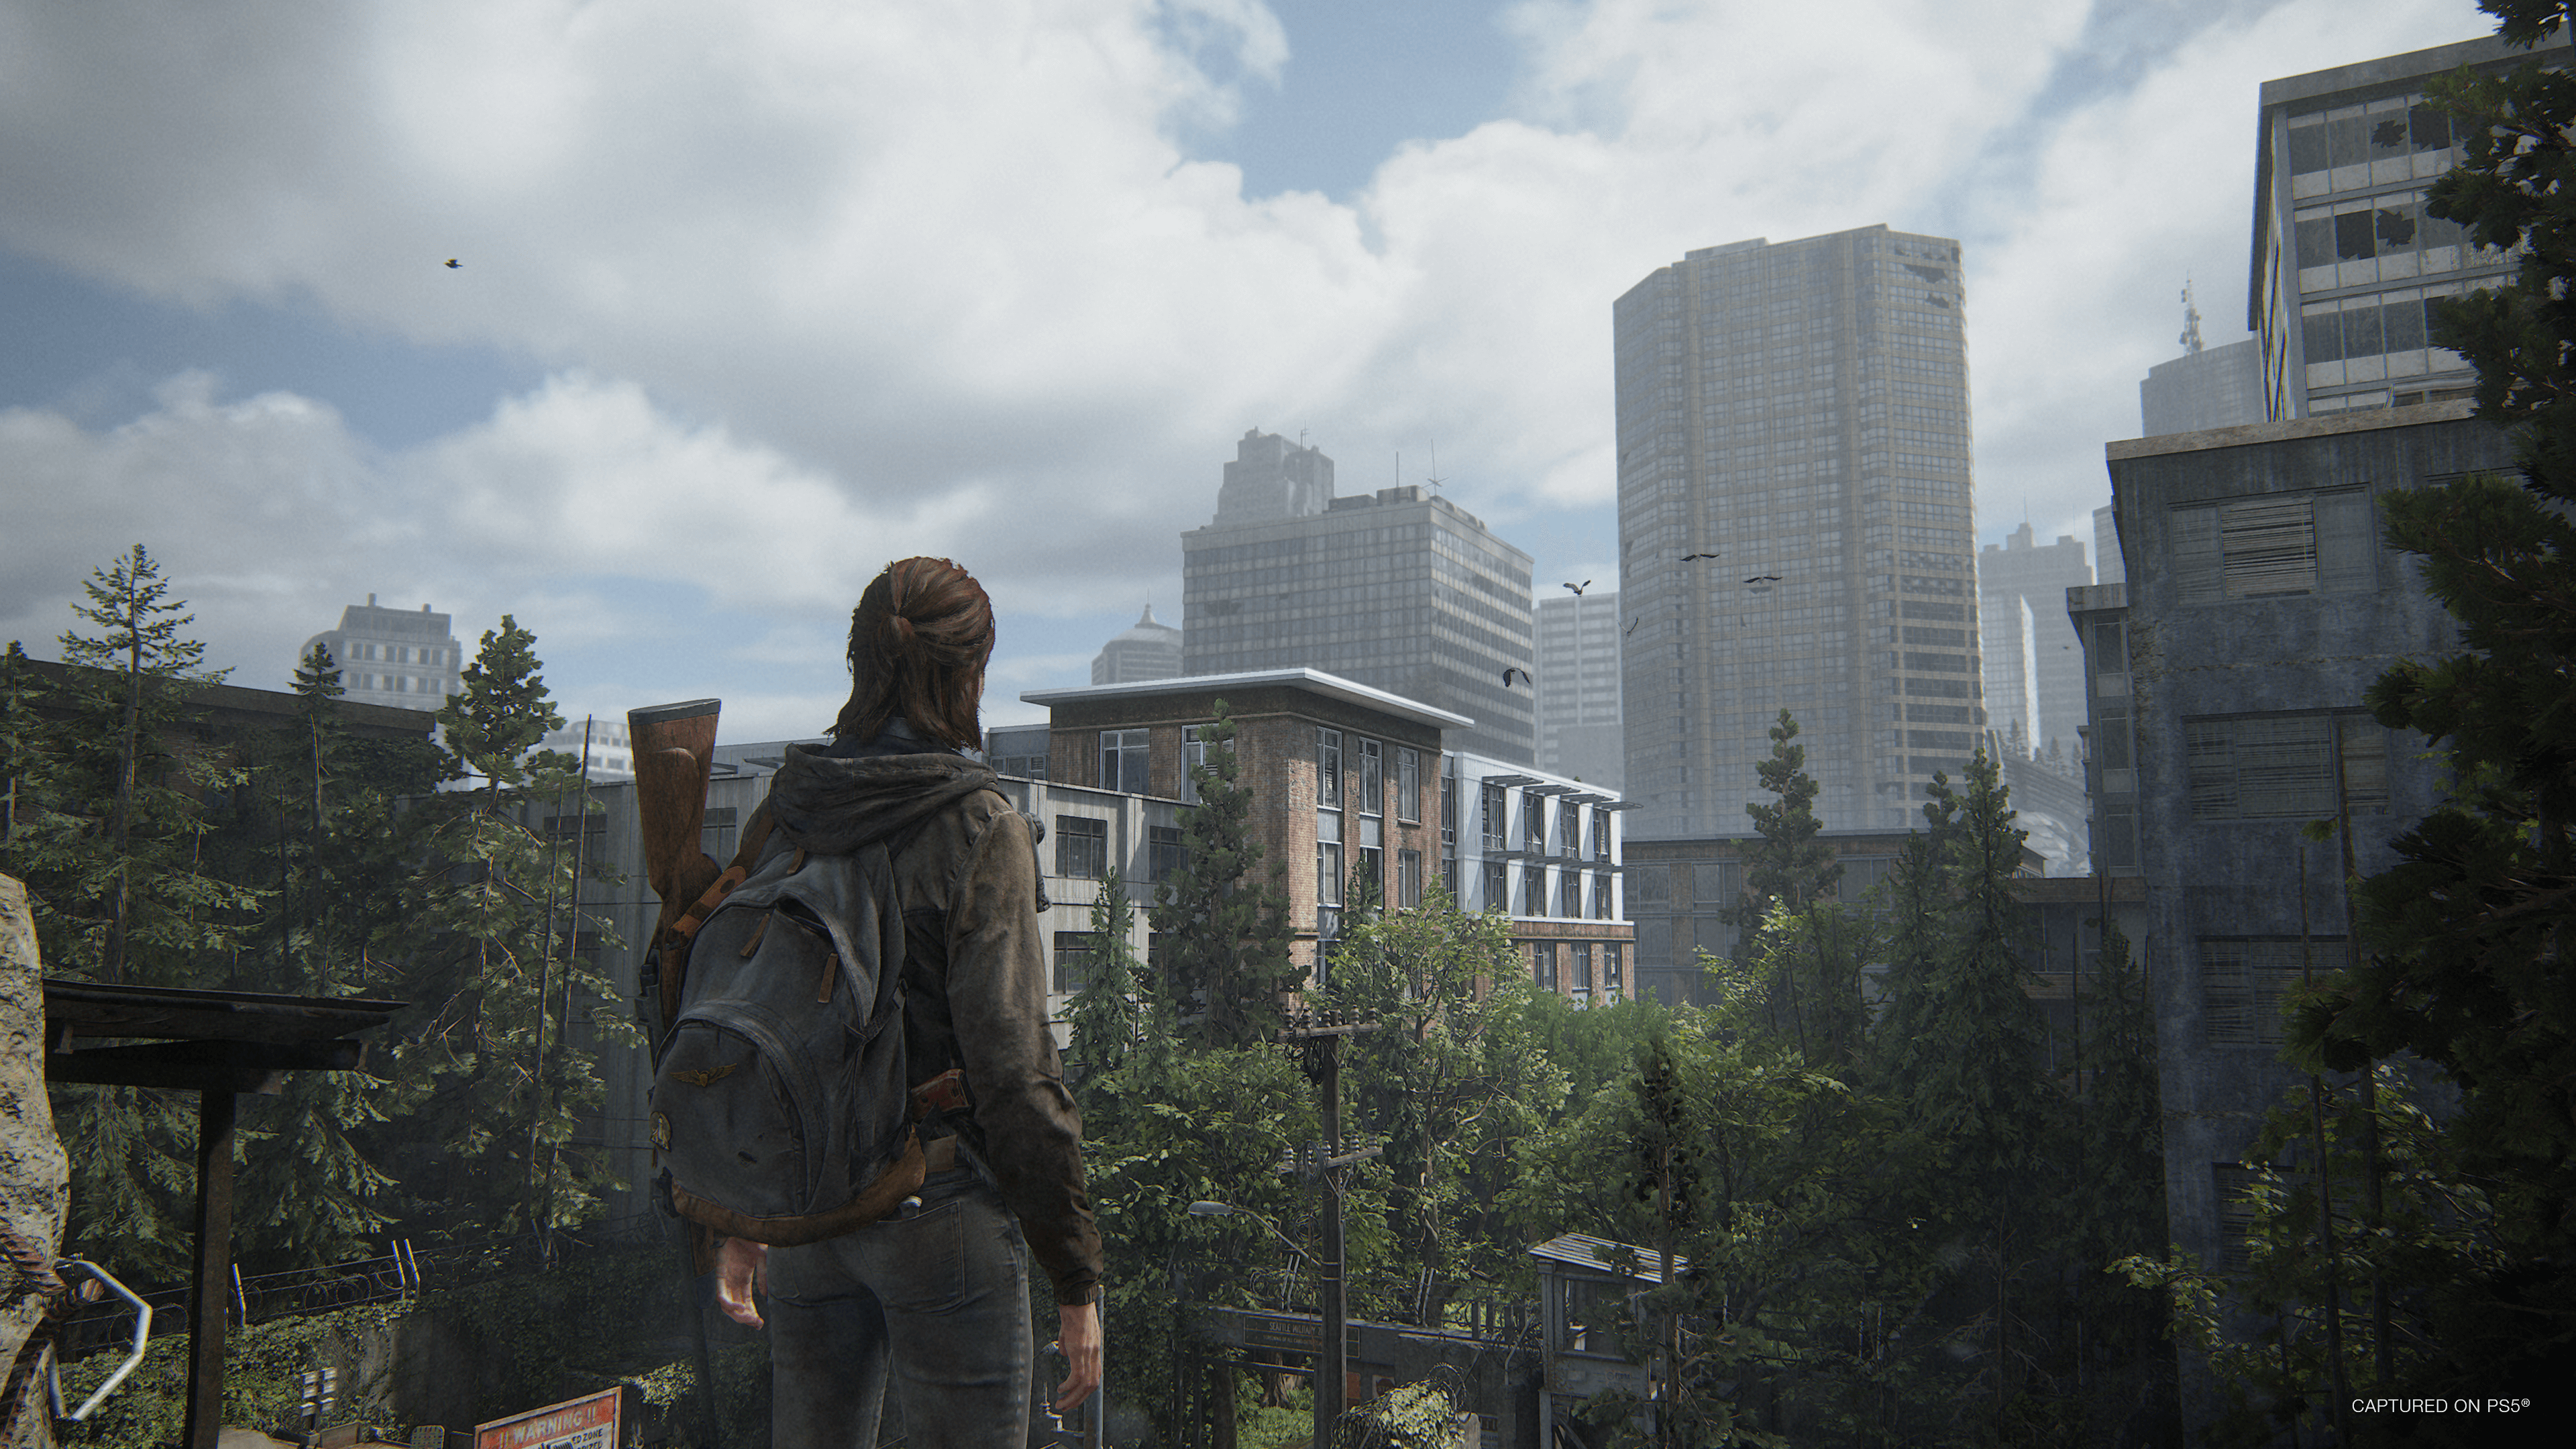 Ellie stands upon a roof overlooking the street. Trees grow with green leaves. A cloudy blue sky and tall buildings are in the distance